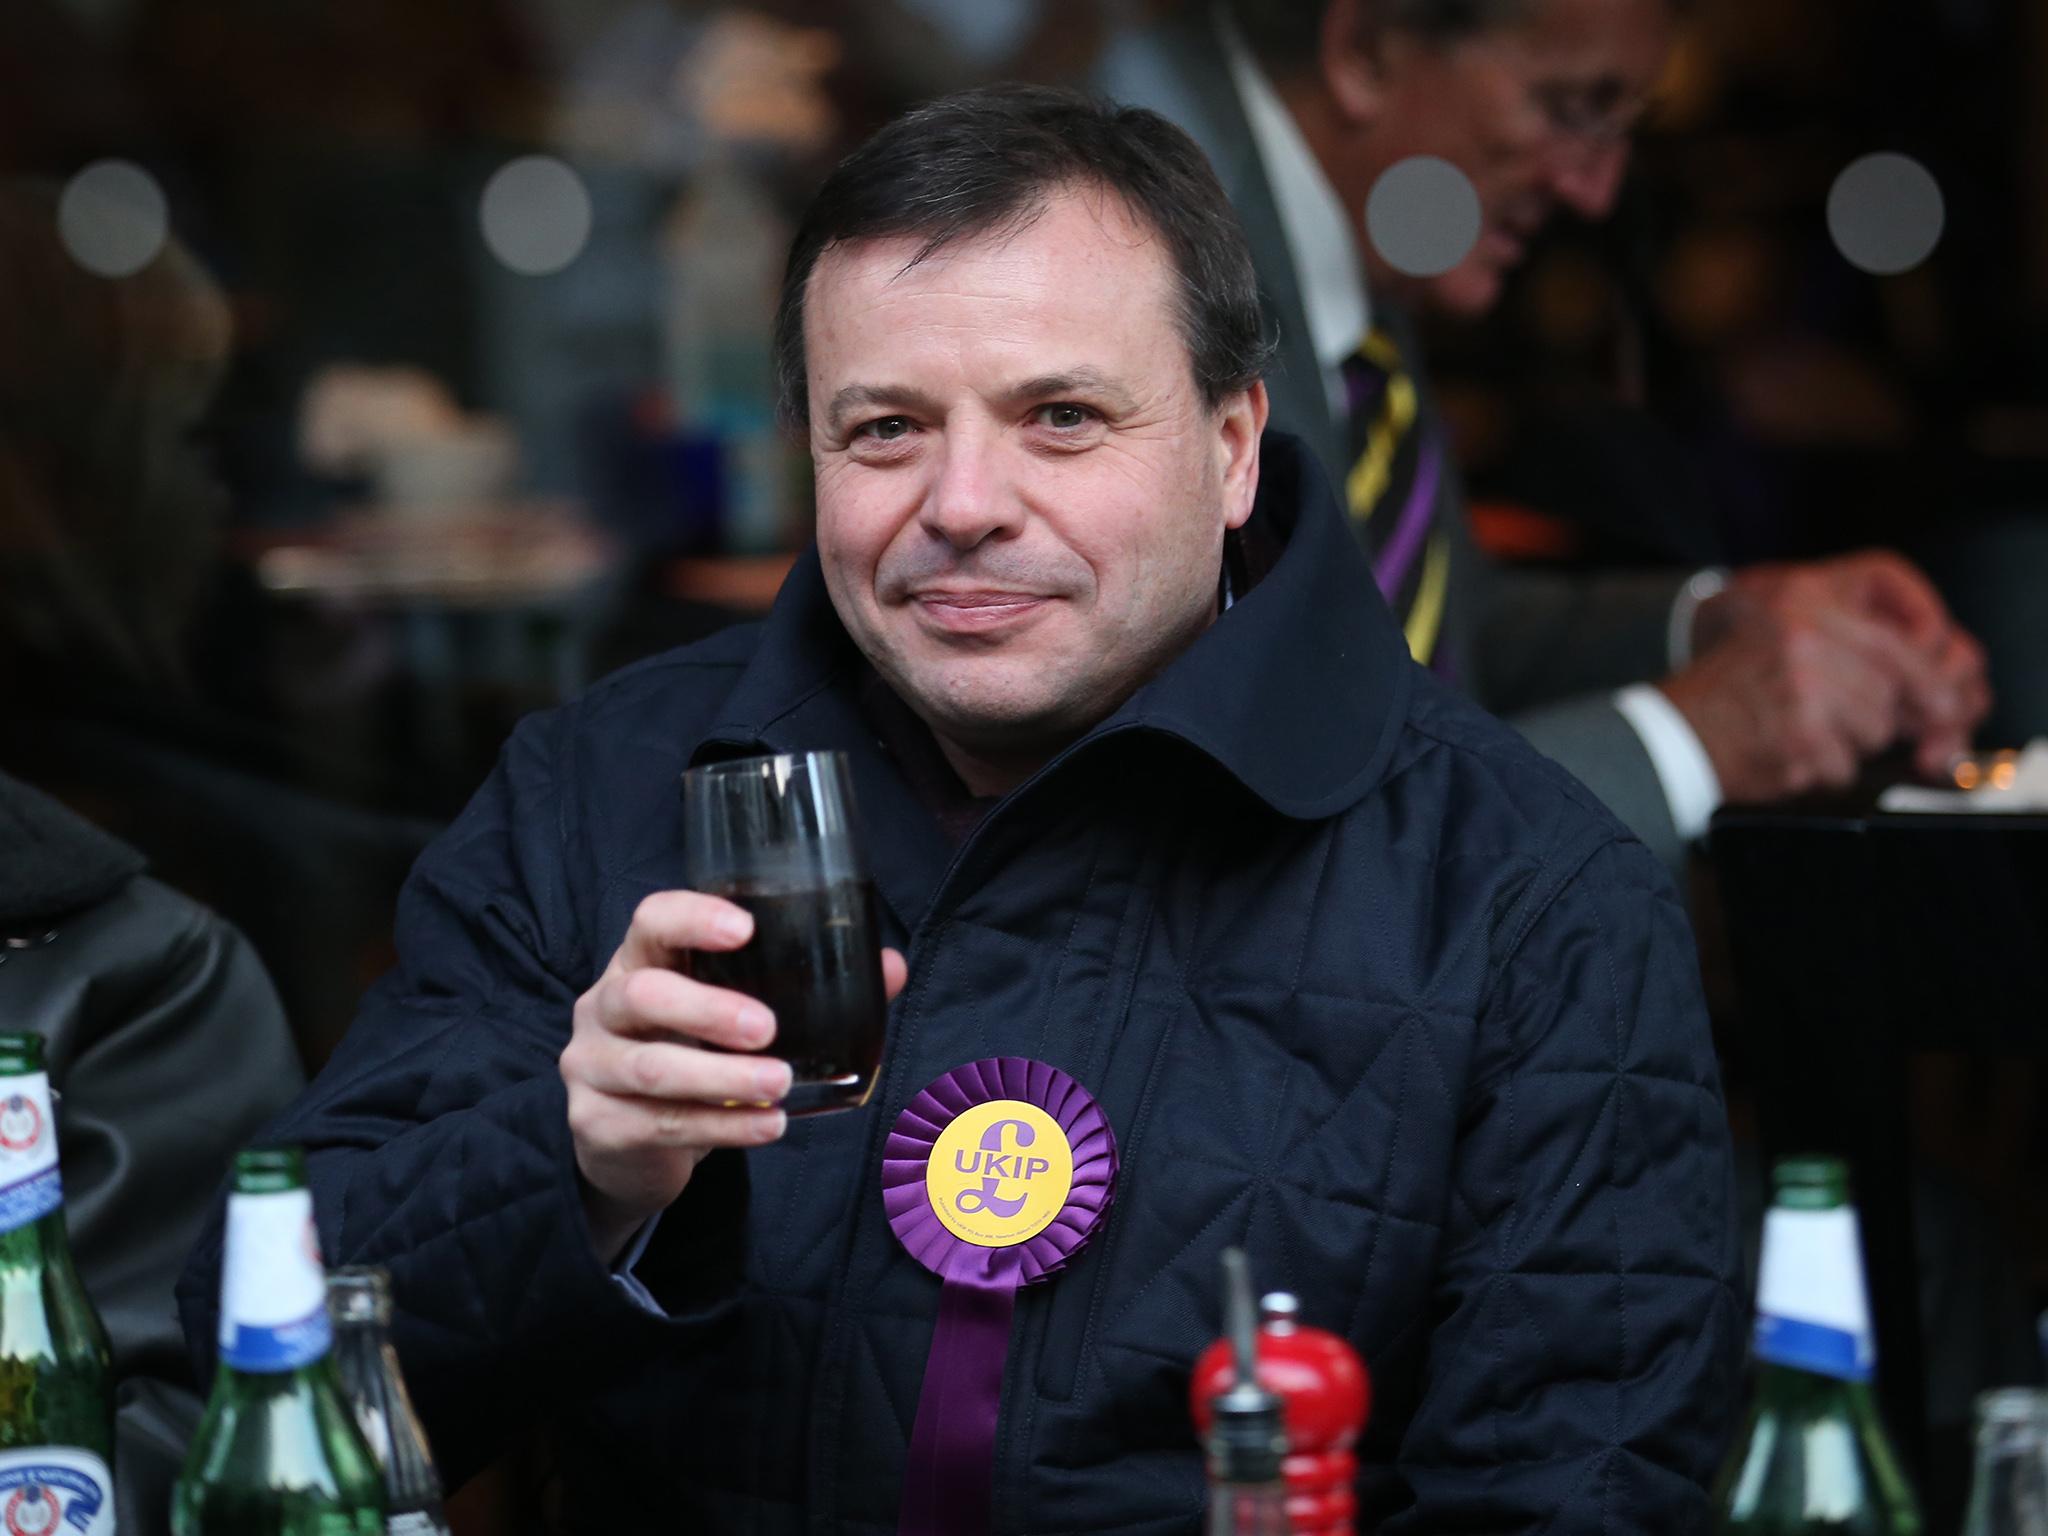 Arron Banks is the main donor to Ukip and also bankrolled the Leave.EU campaign